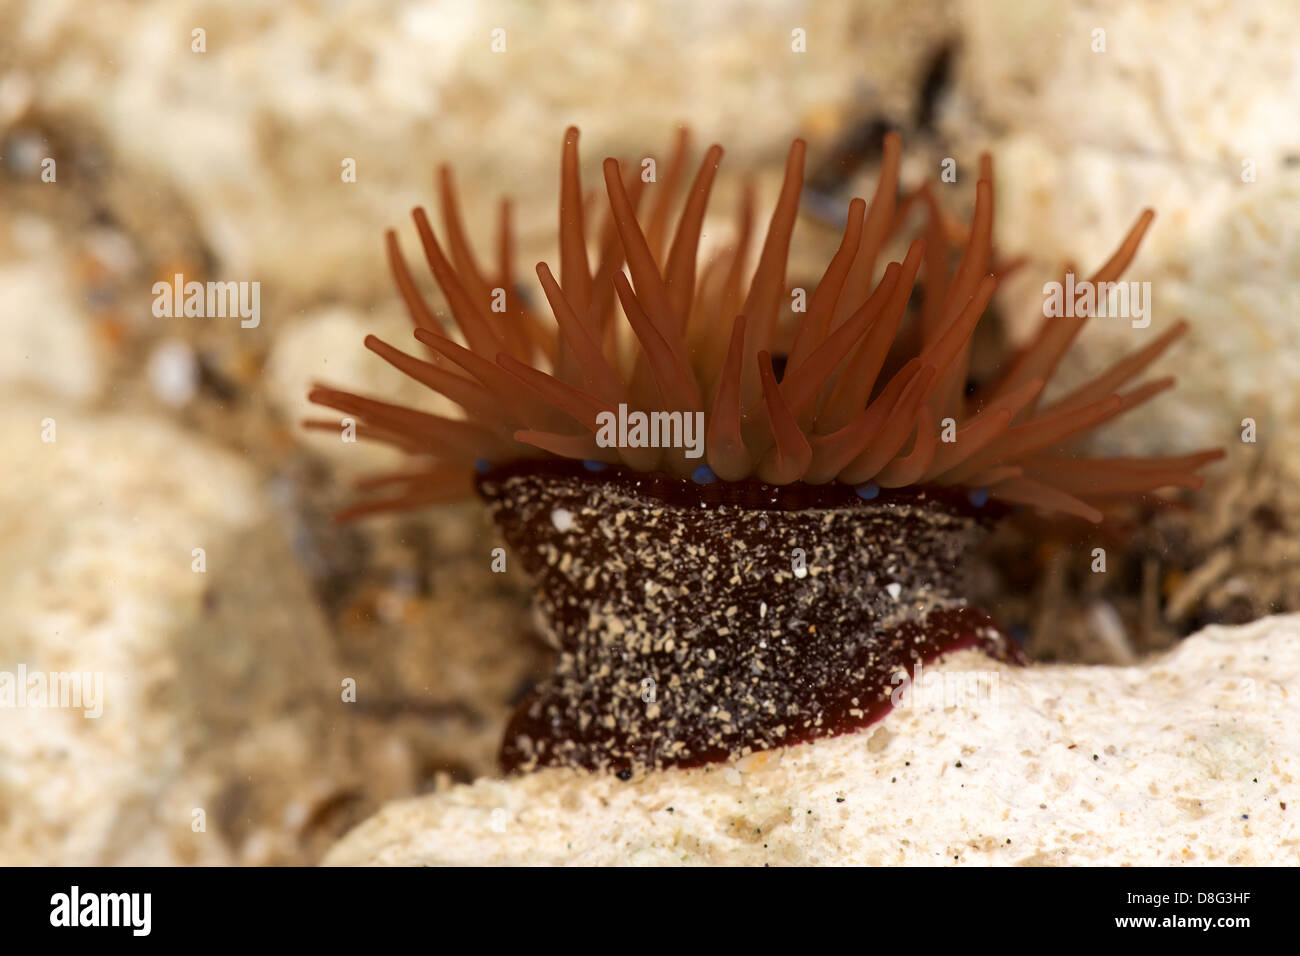 Reddish brown sea anemone in its natural habitat, with background of sea, stones and sand Stock Photo